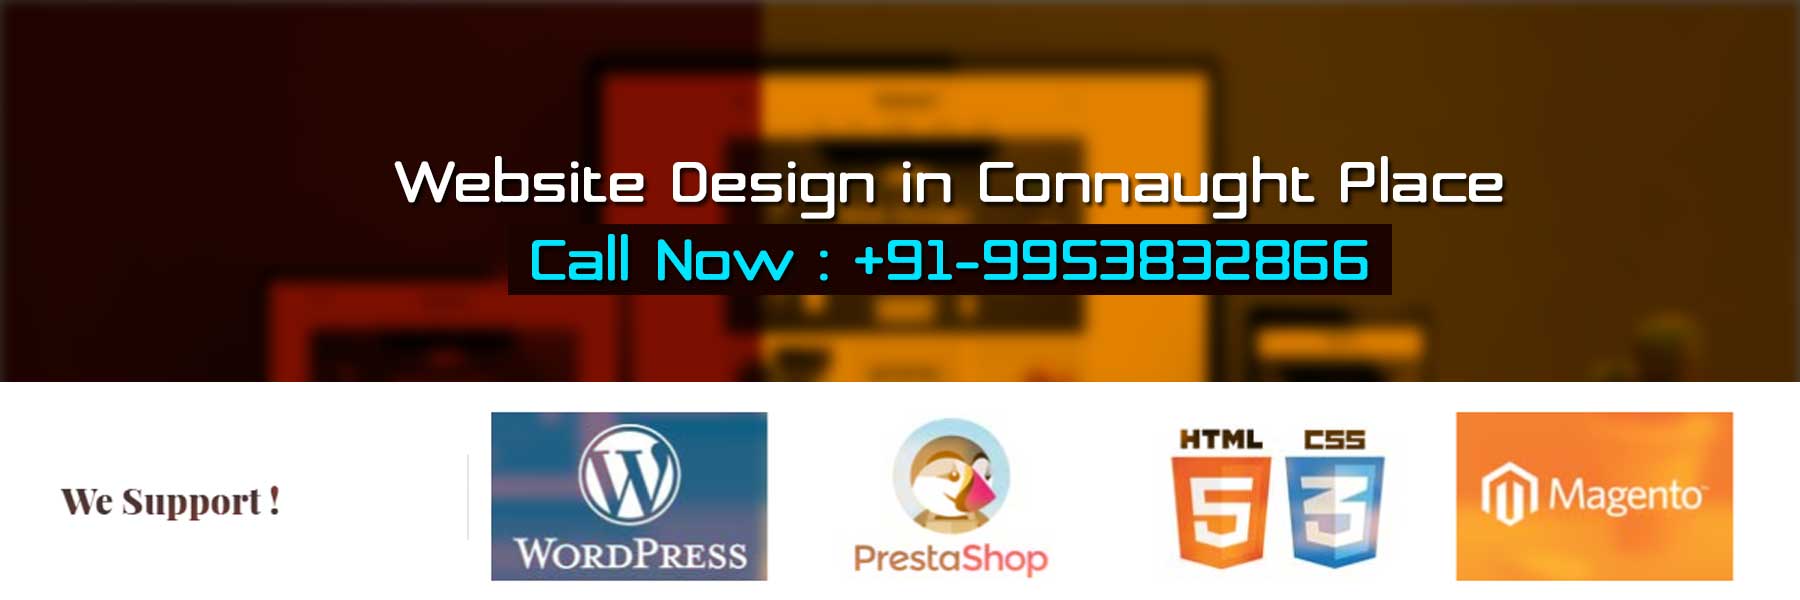 Website Design in Connaught Place